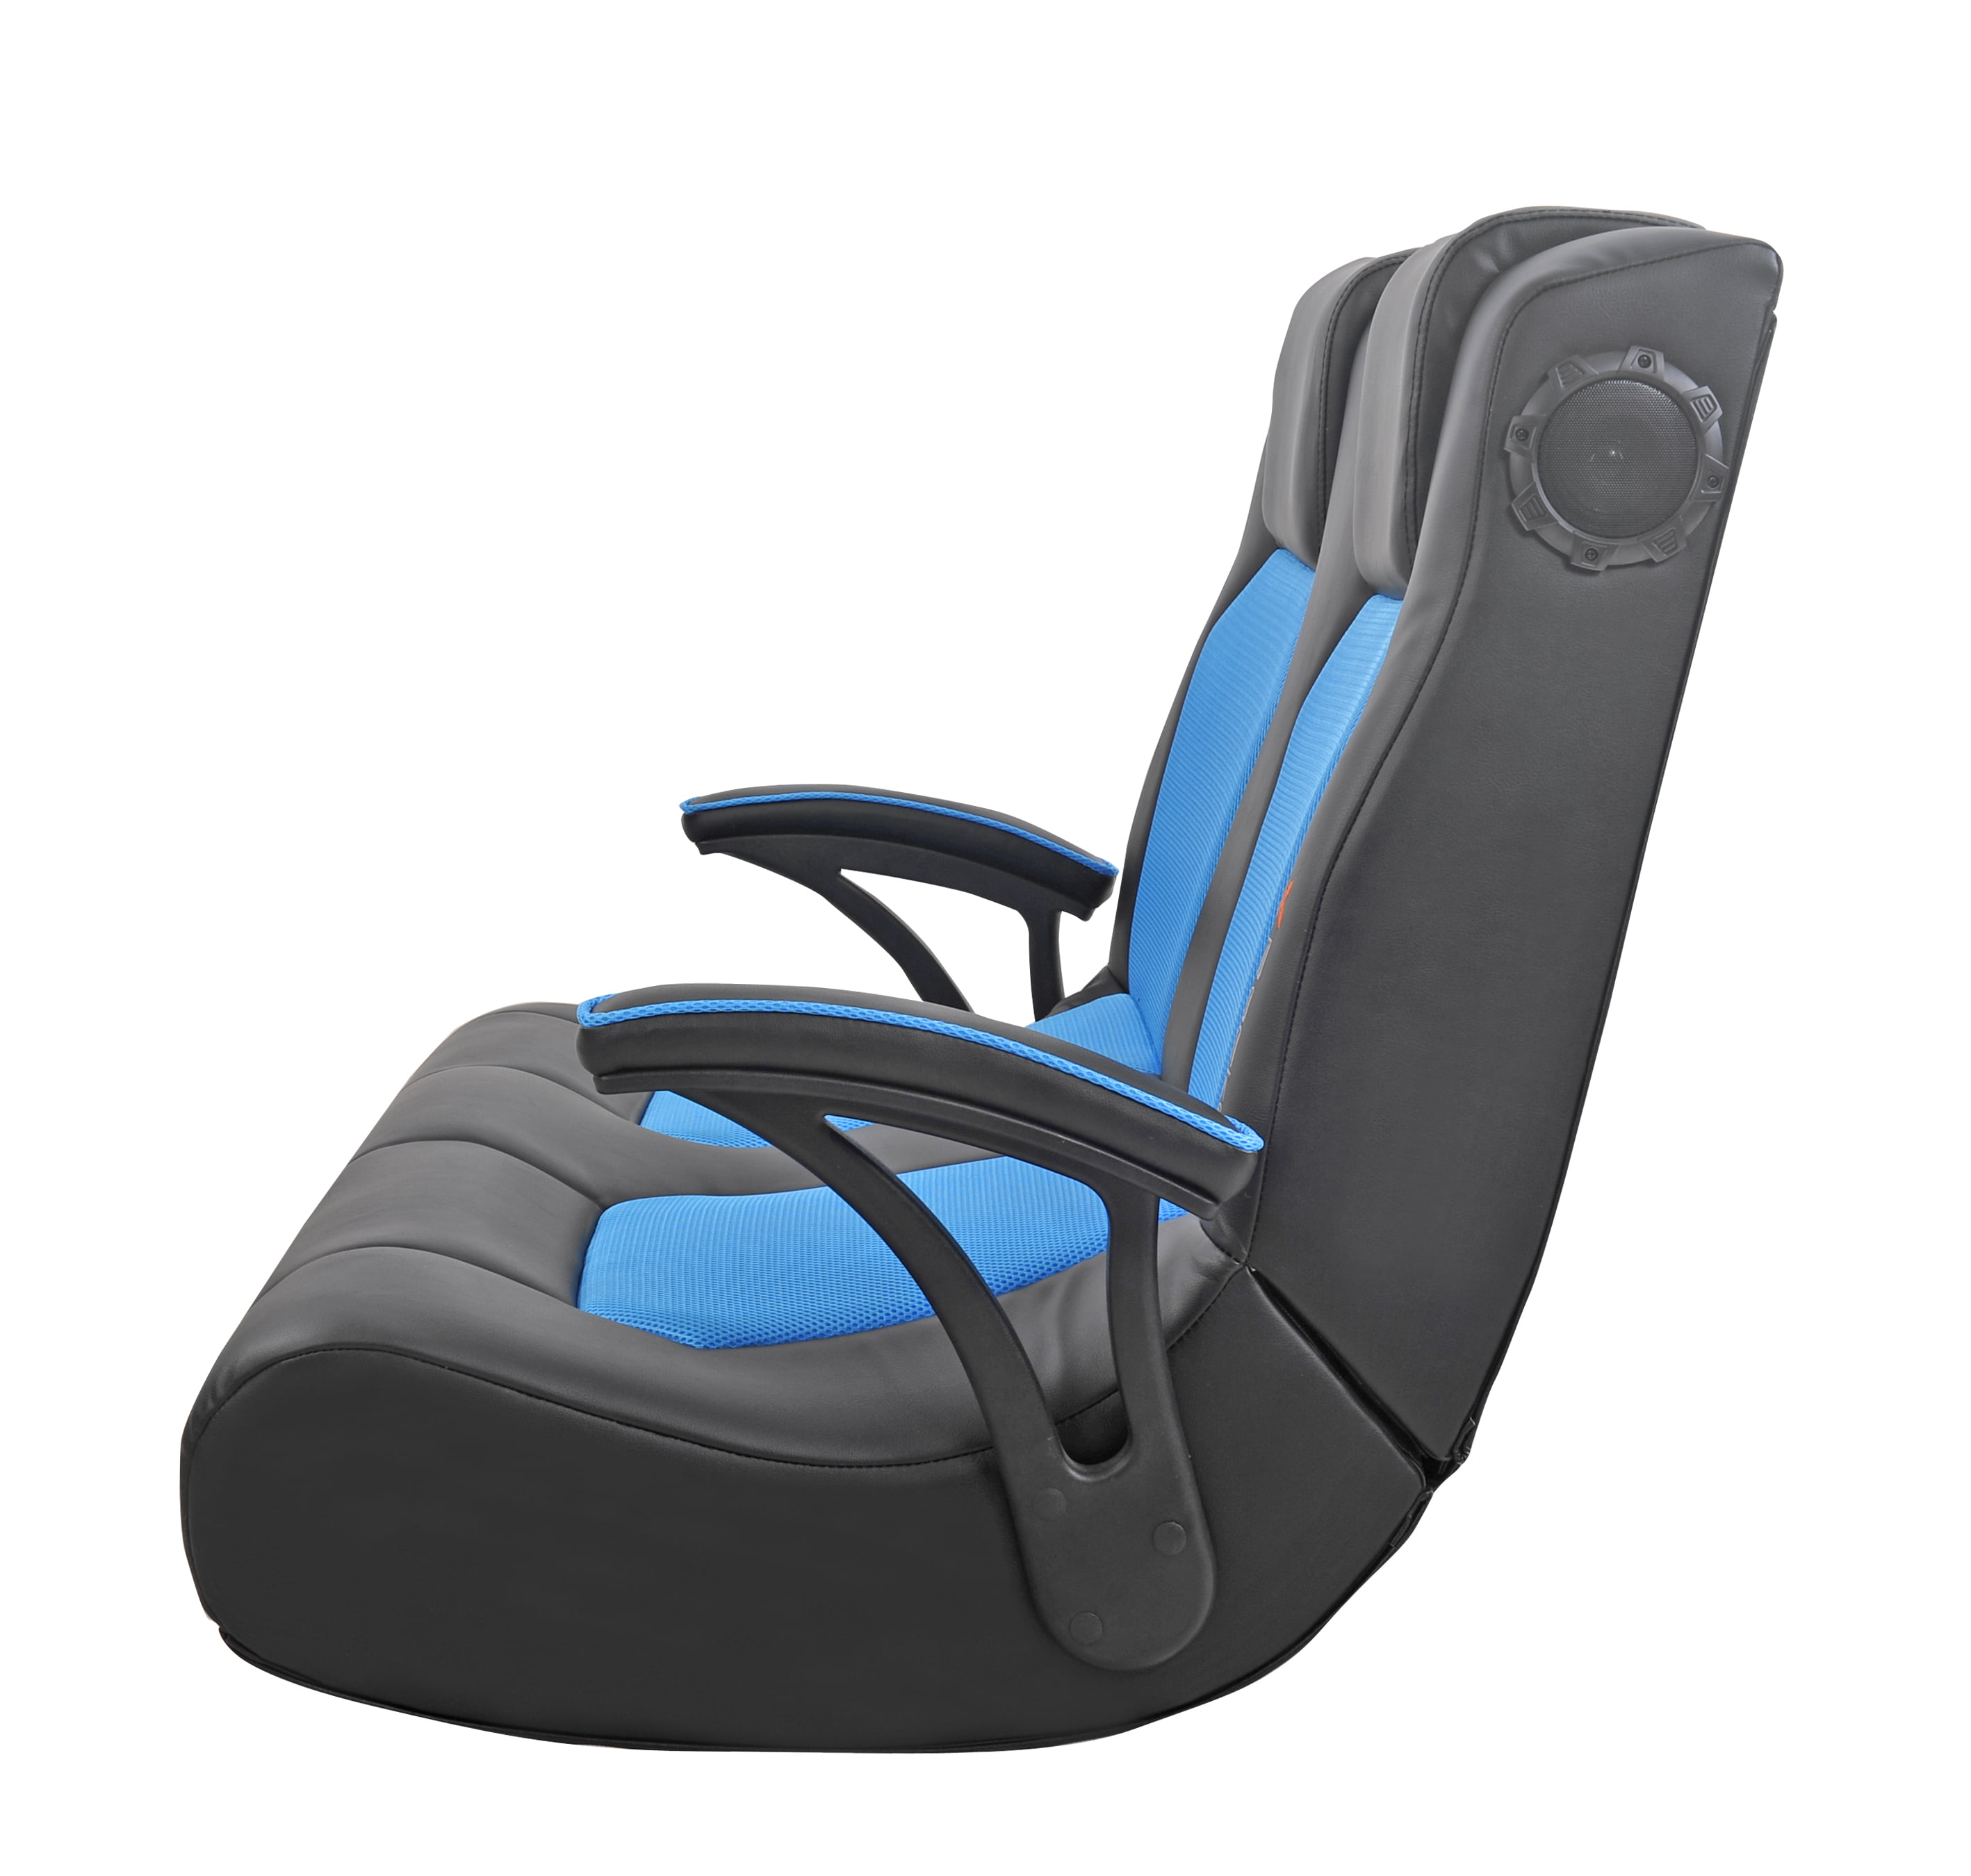 Minimalist Black Friday Gaming Chair Sales for Large Space